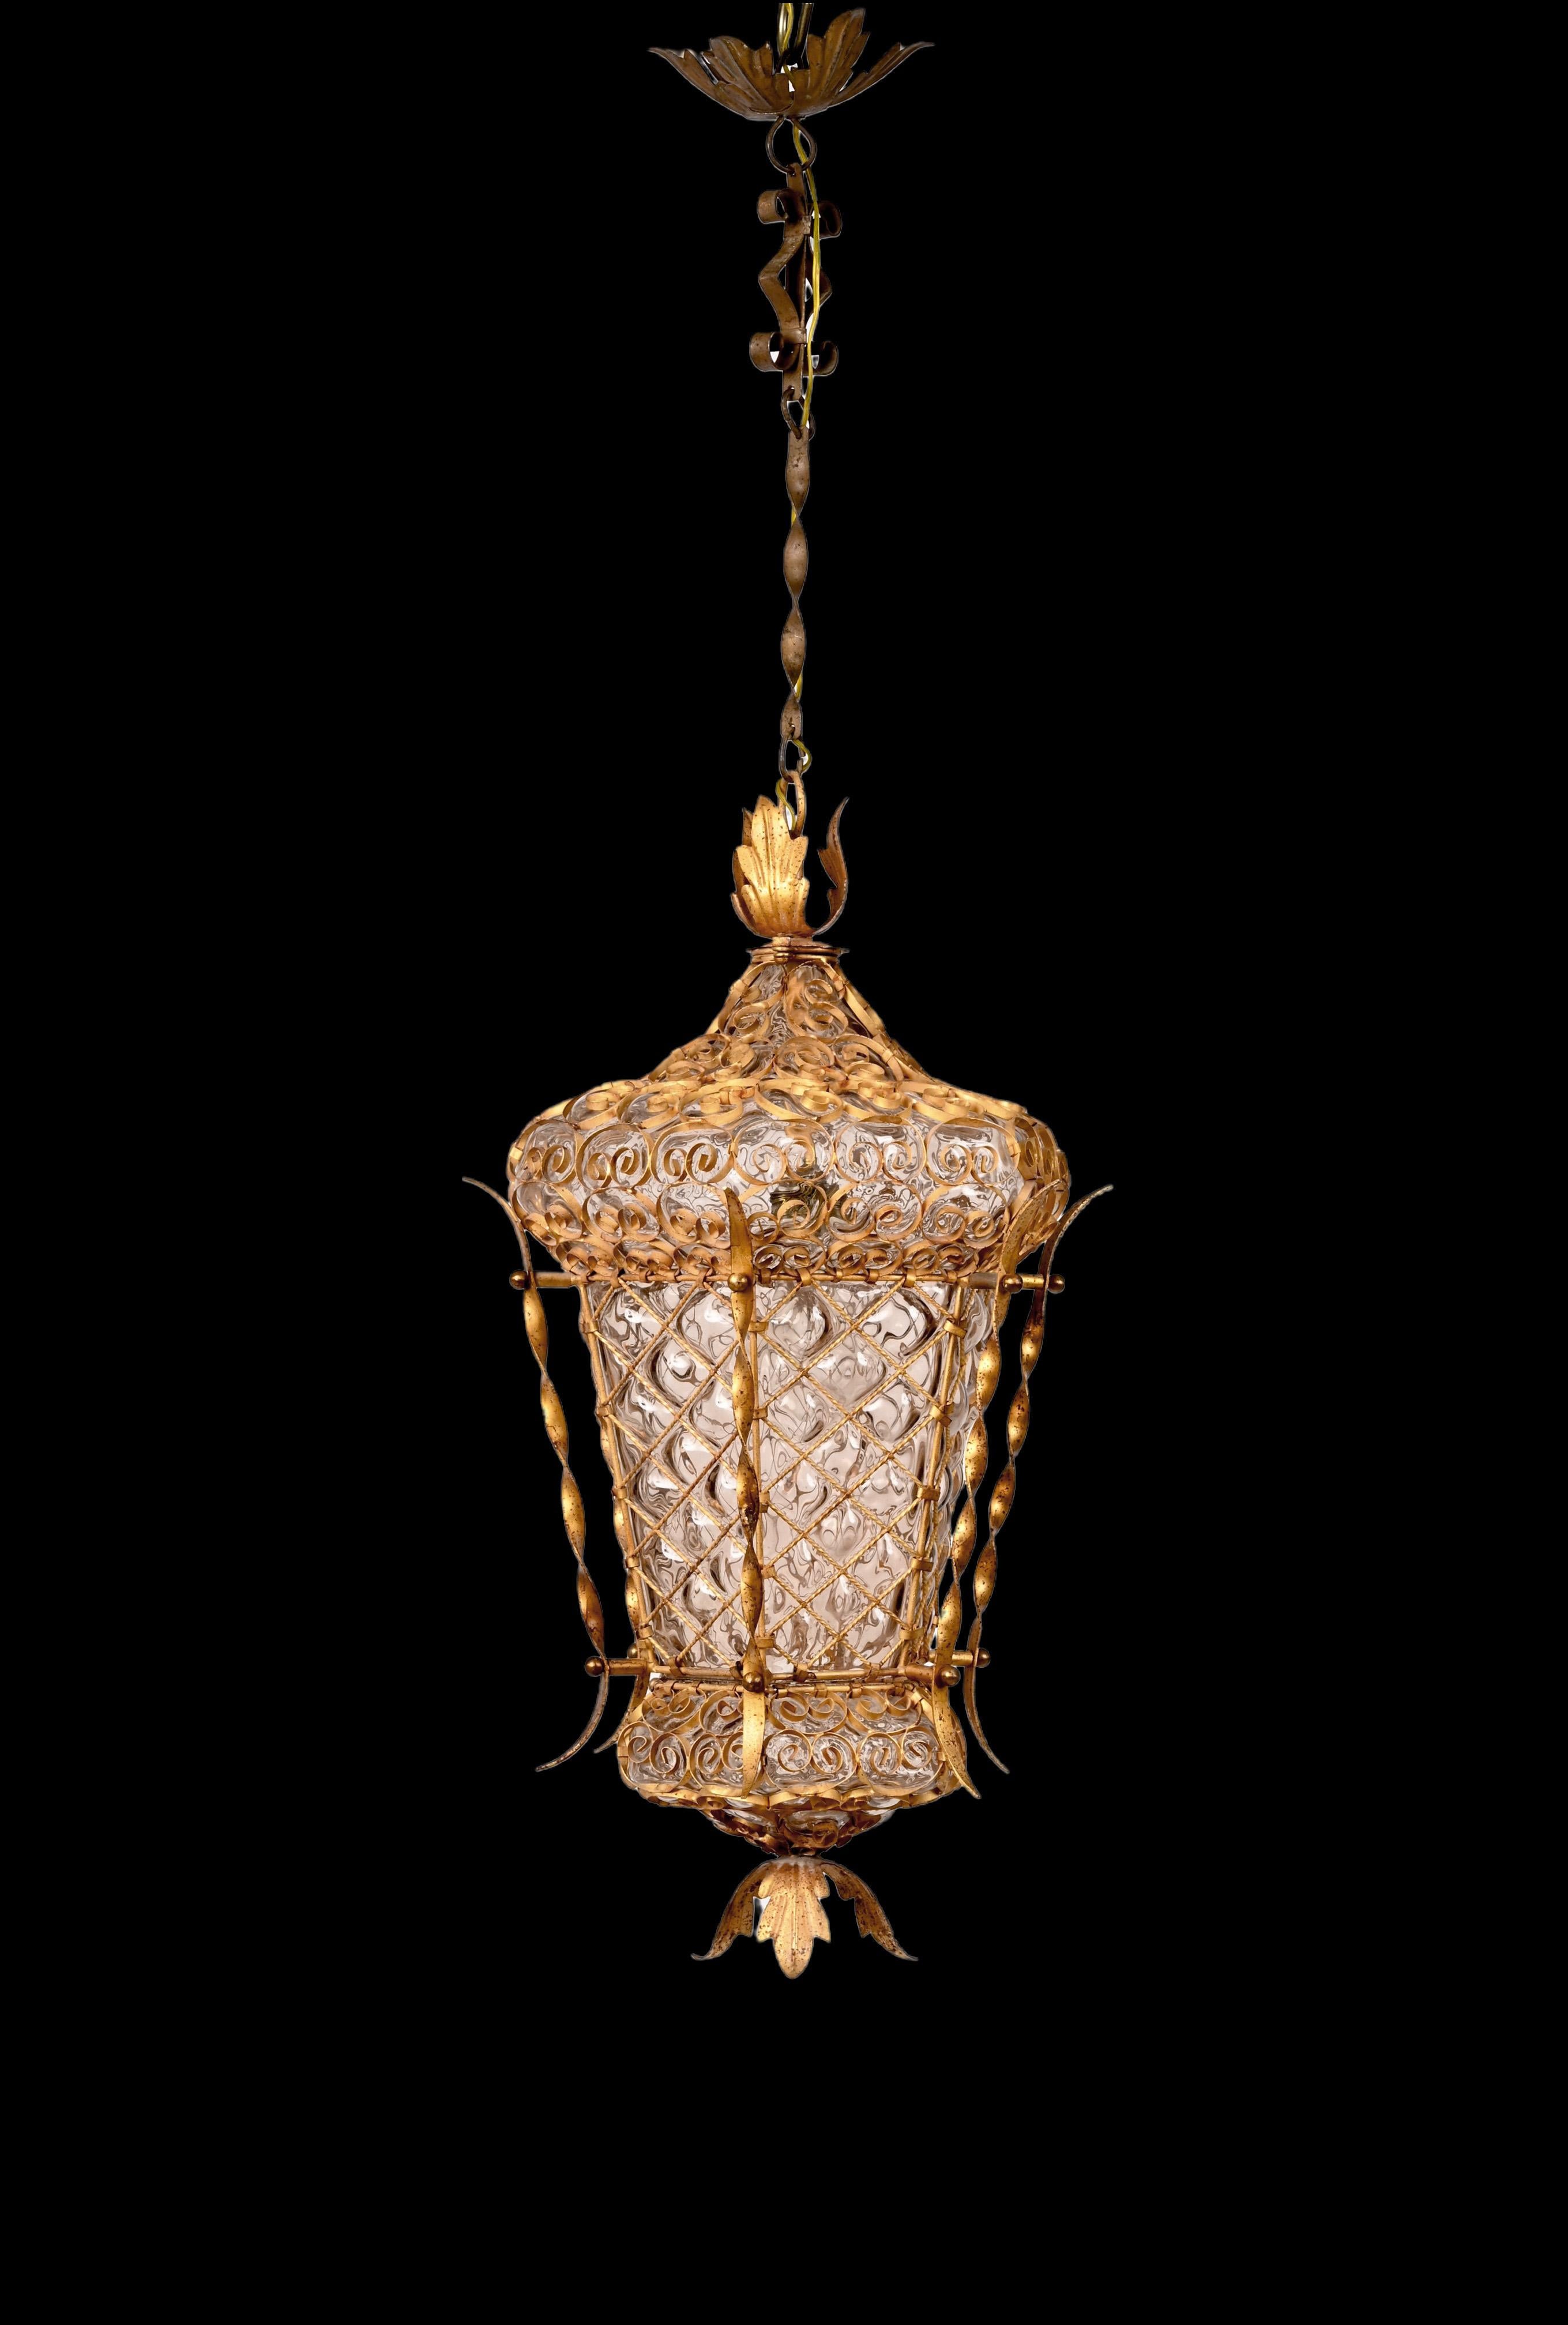 Mid-Century Modern Midcentury Venetian Mouth Blown Glass in Gold Painted Metal Frame Lantern, 1940s For Sale